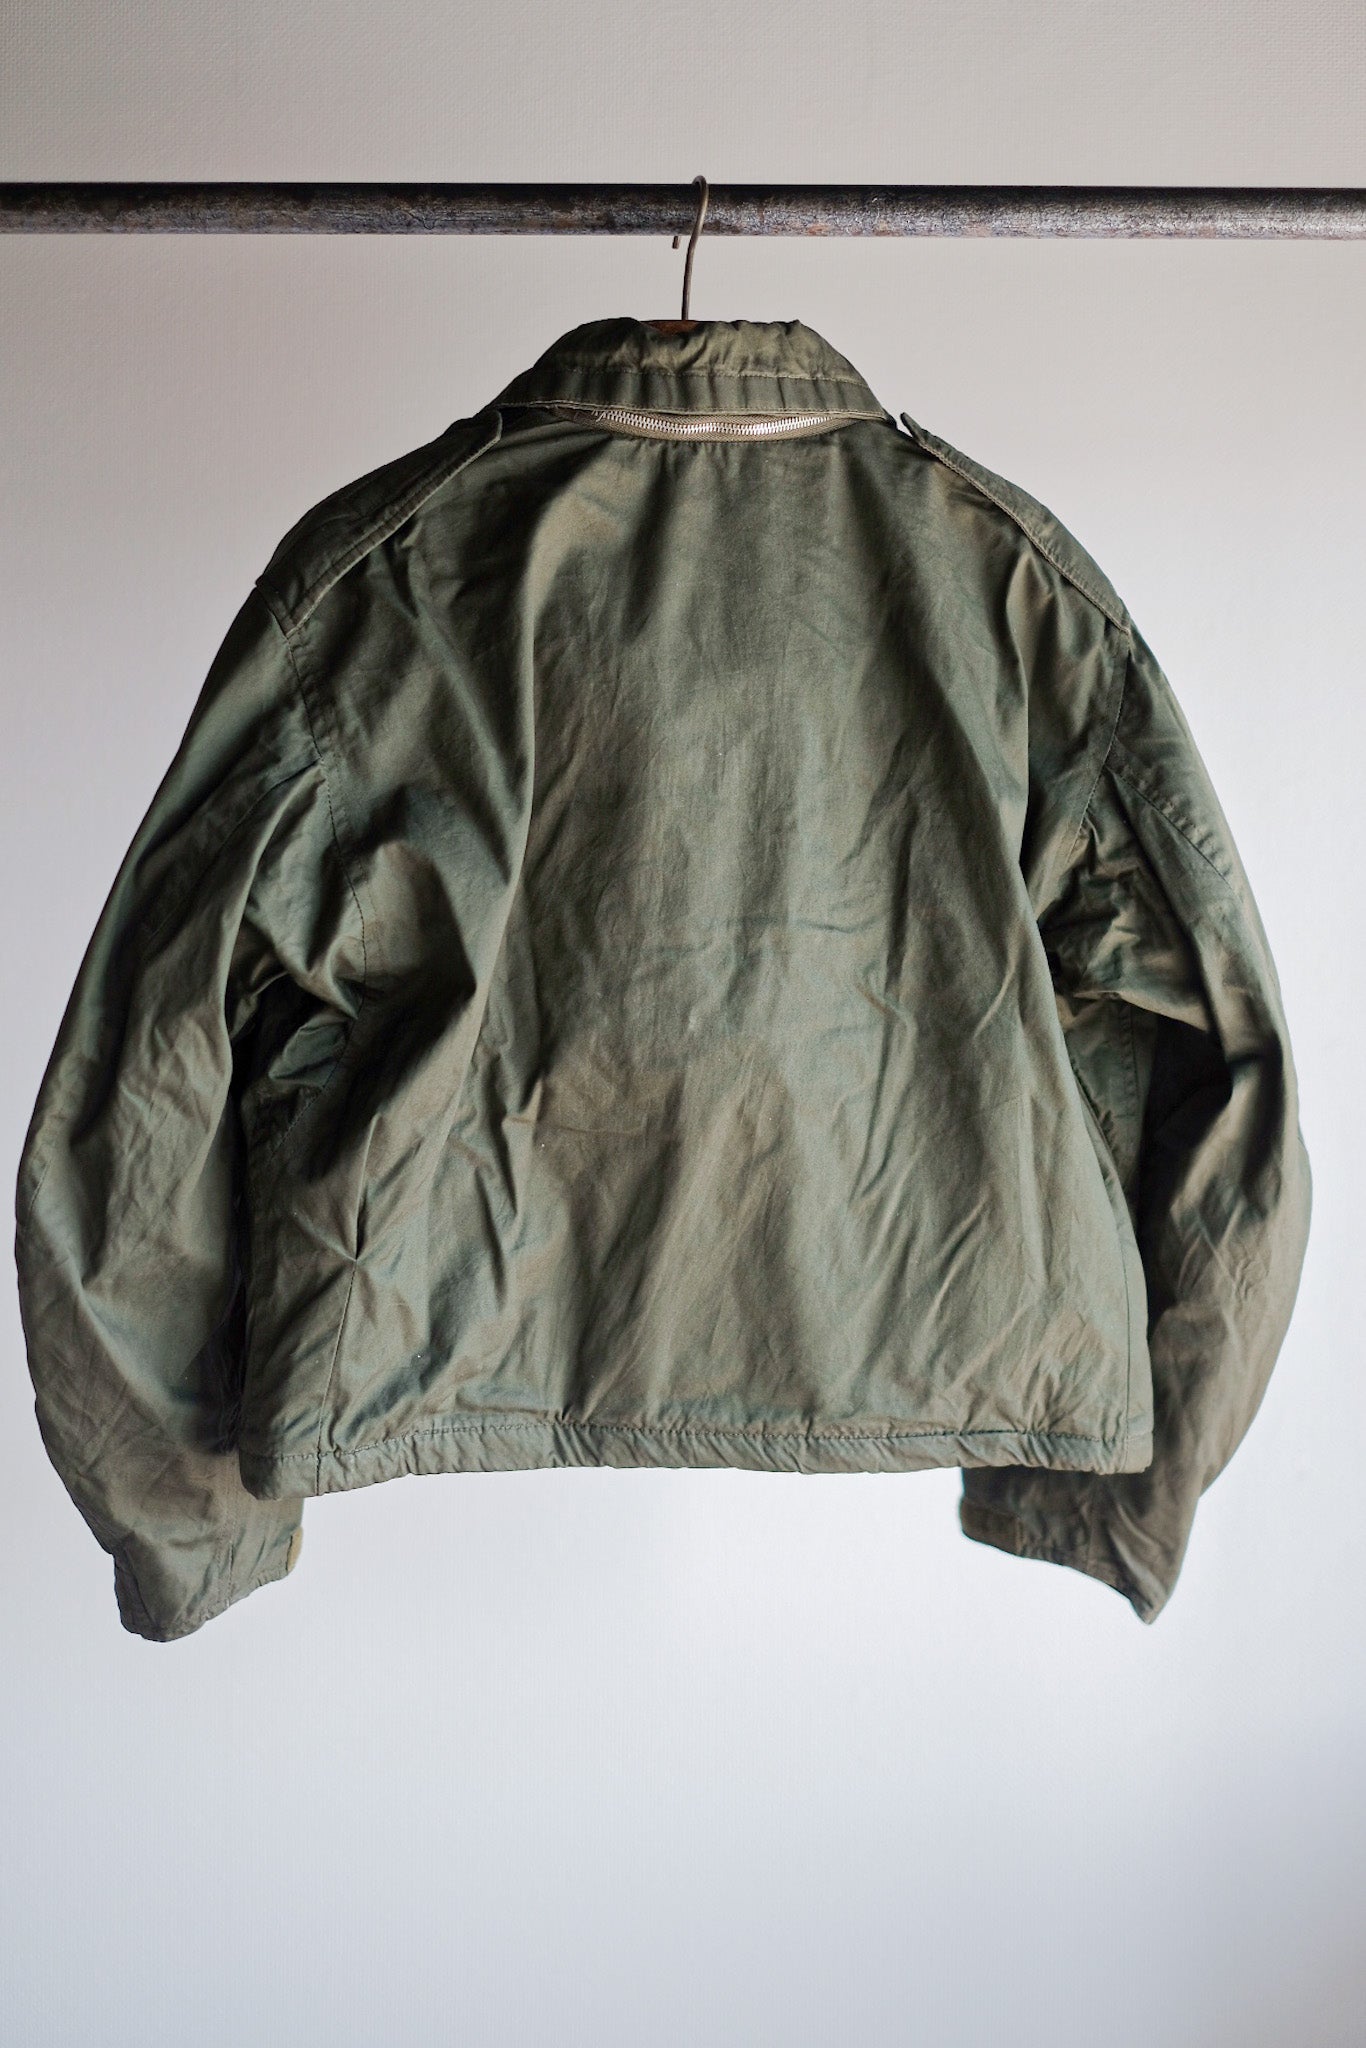 [~ 80's] ROYAL AIR FORCE MK3 COLD WEATHER FLYING JACKET SIZE.4